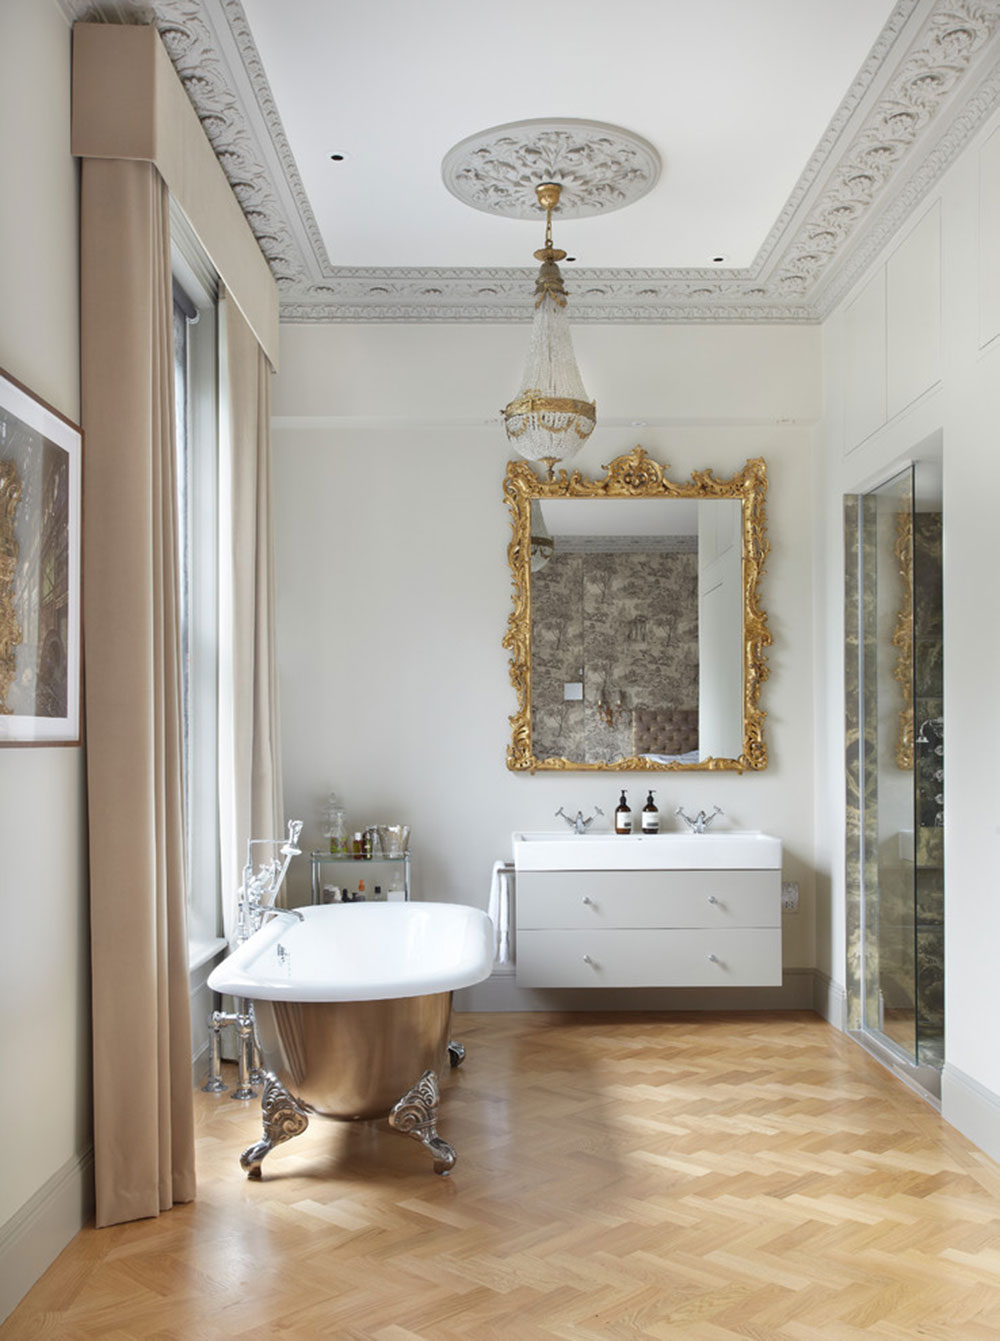 Drummonds-Case Study-London-Townhouse-Maida-Vale-by-Drummonds-Bathroom Vintage bathroom decoration that you can try in your home